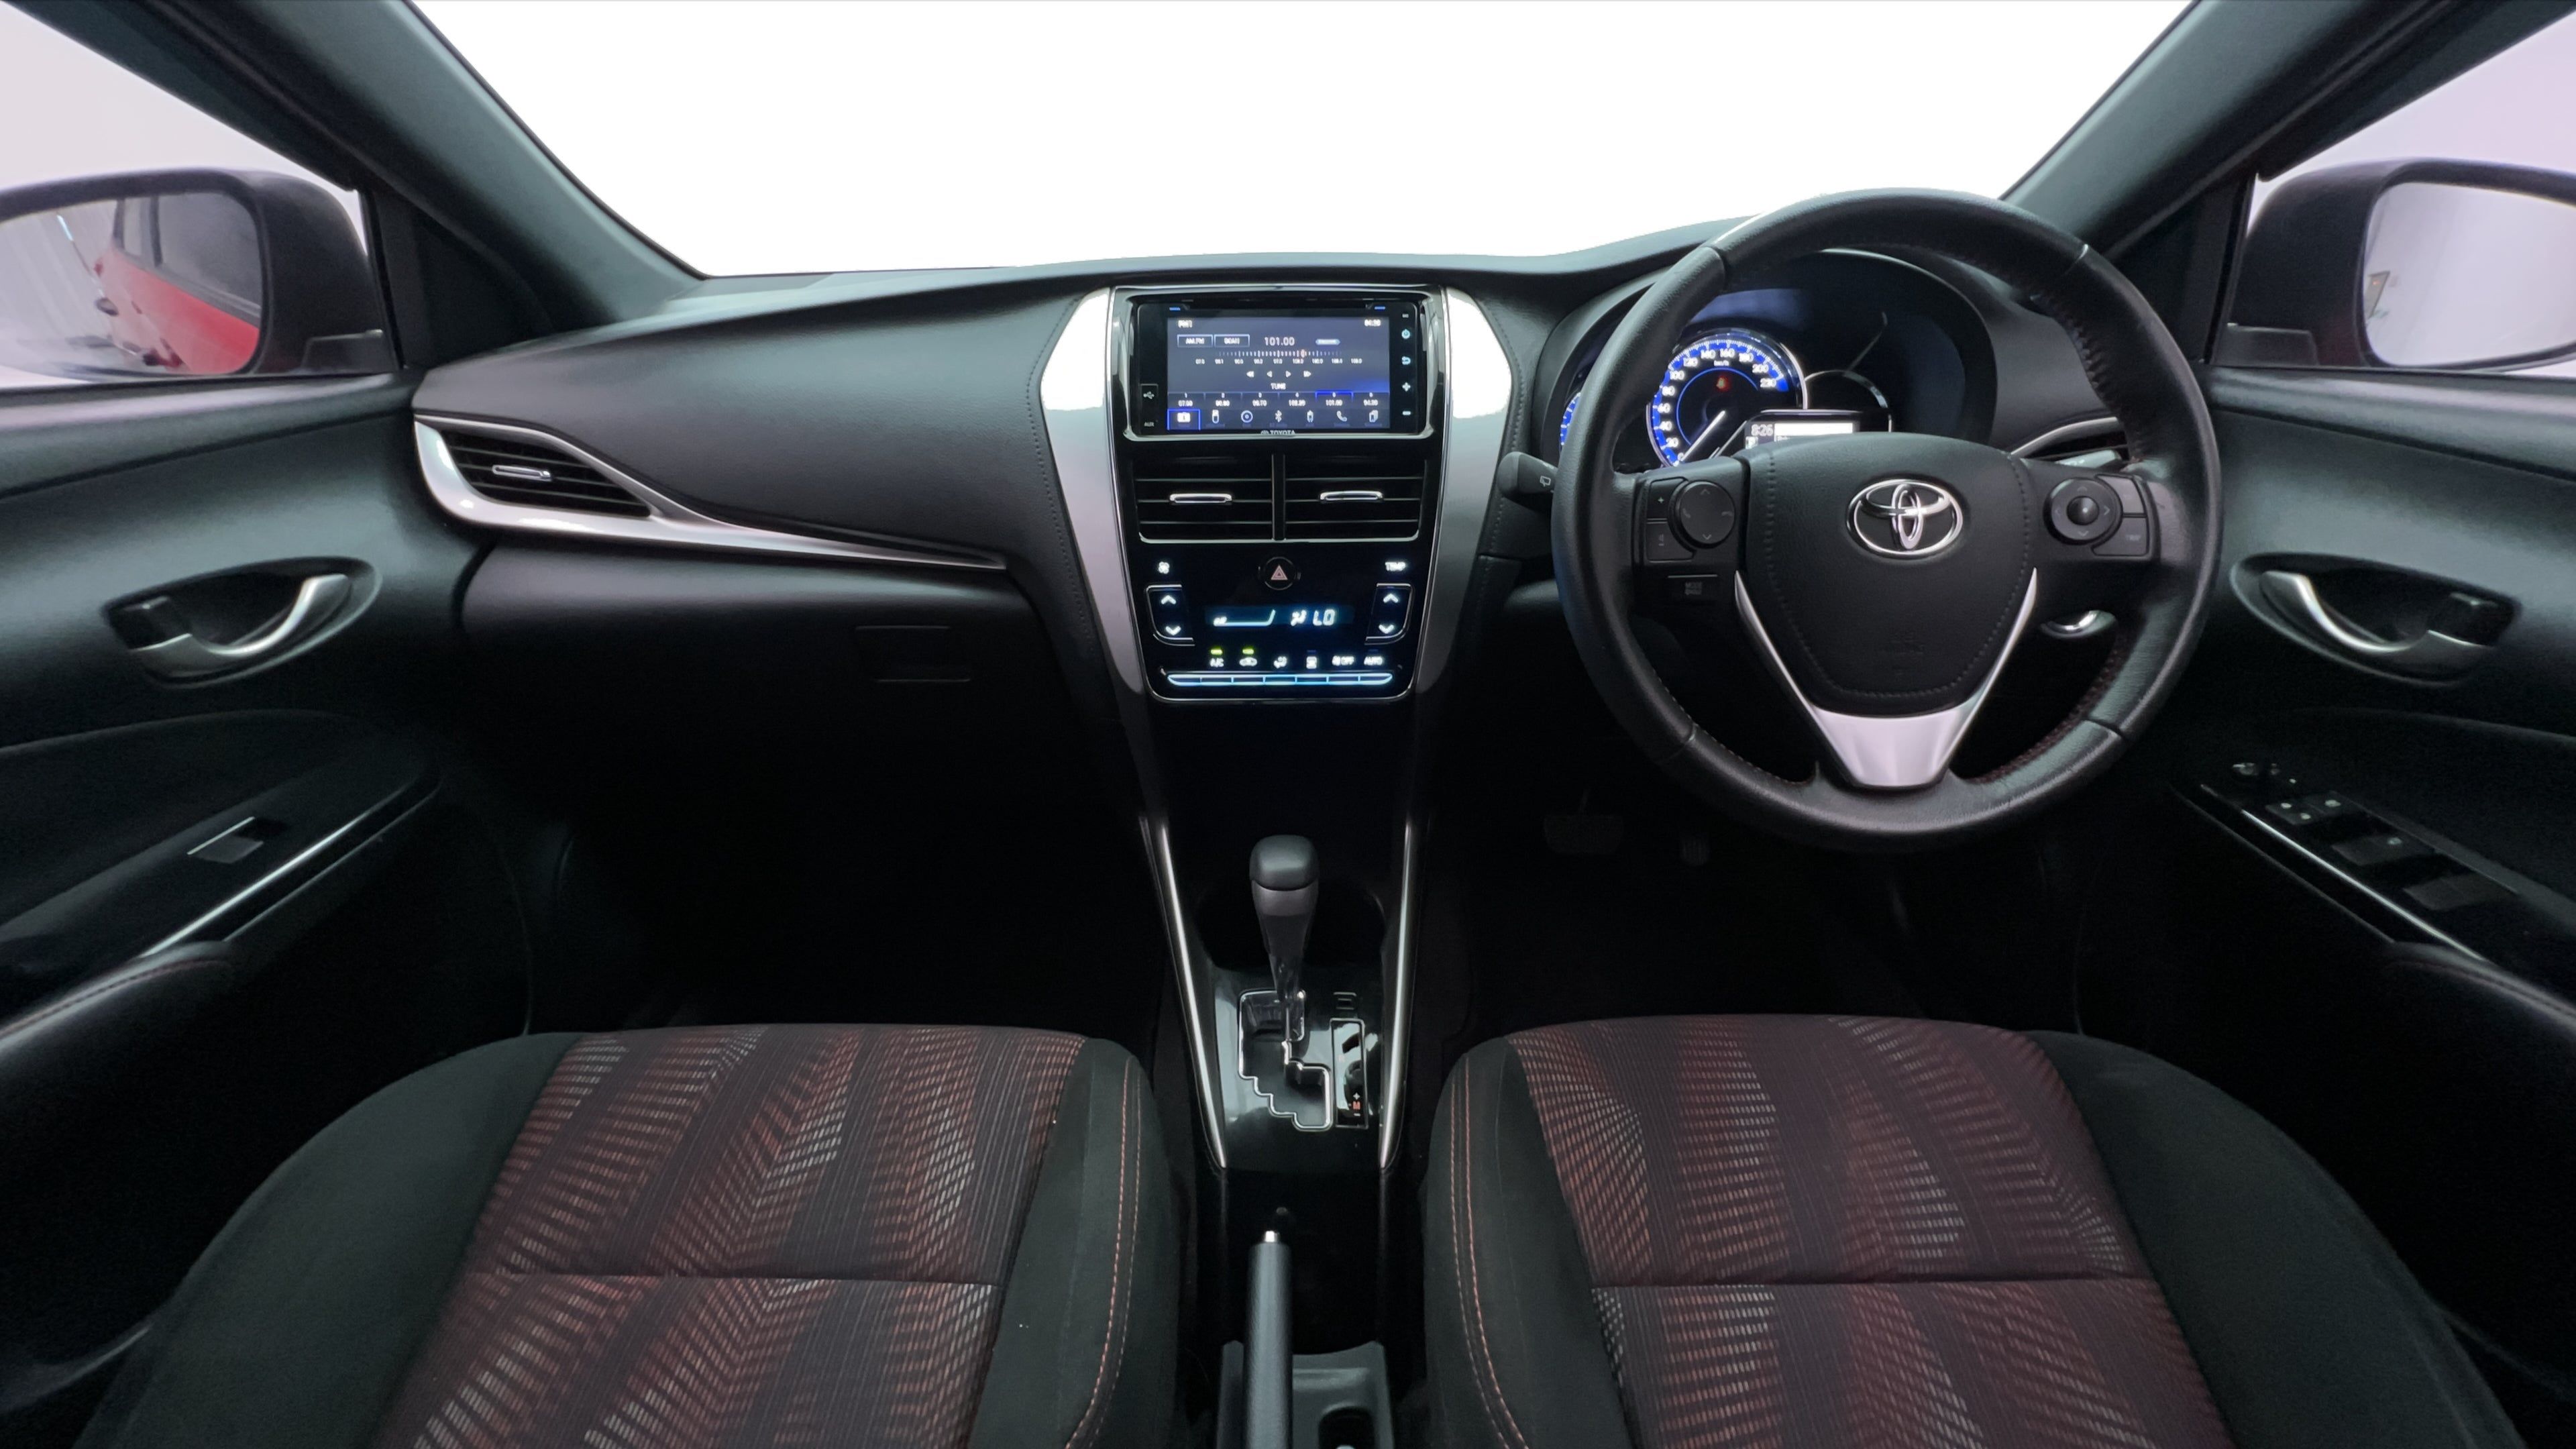 Used 2019 Toyota Yaris S TRD 1.5L AT S TRD 1.5L AT for sale